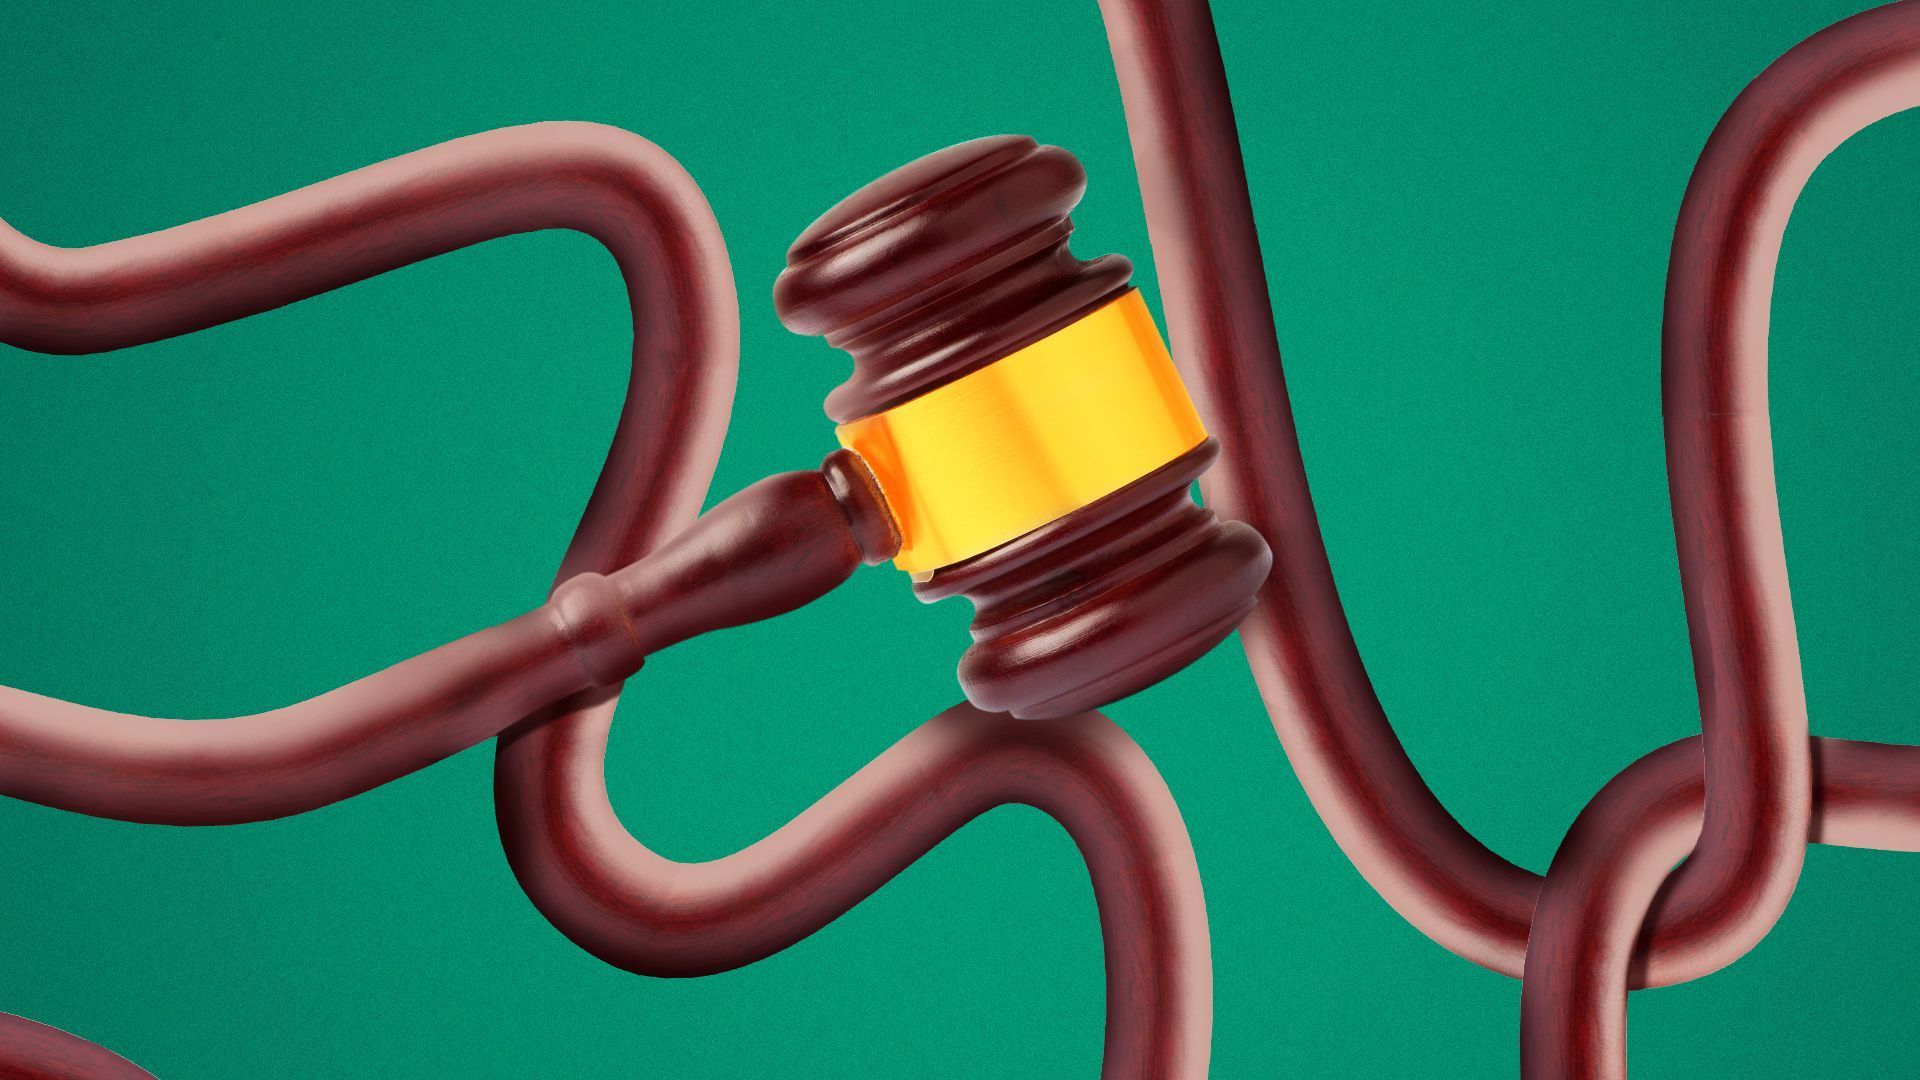 Illustration of a gavel with an extra long handle that loops all around itself and all over the image in a squiggly pattern. 